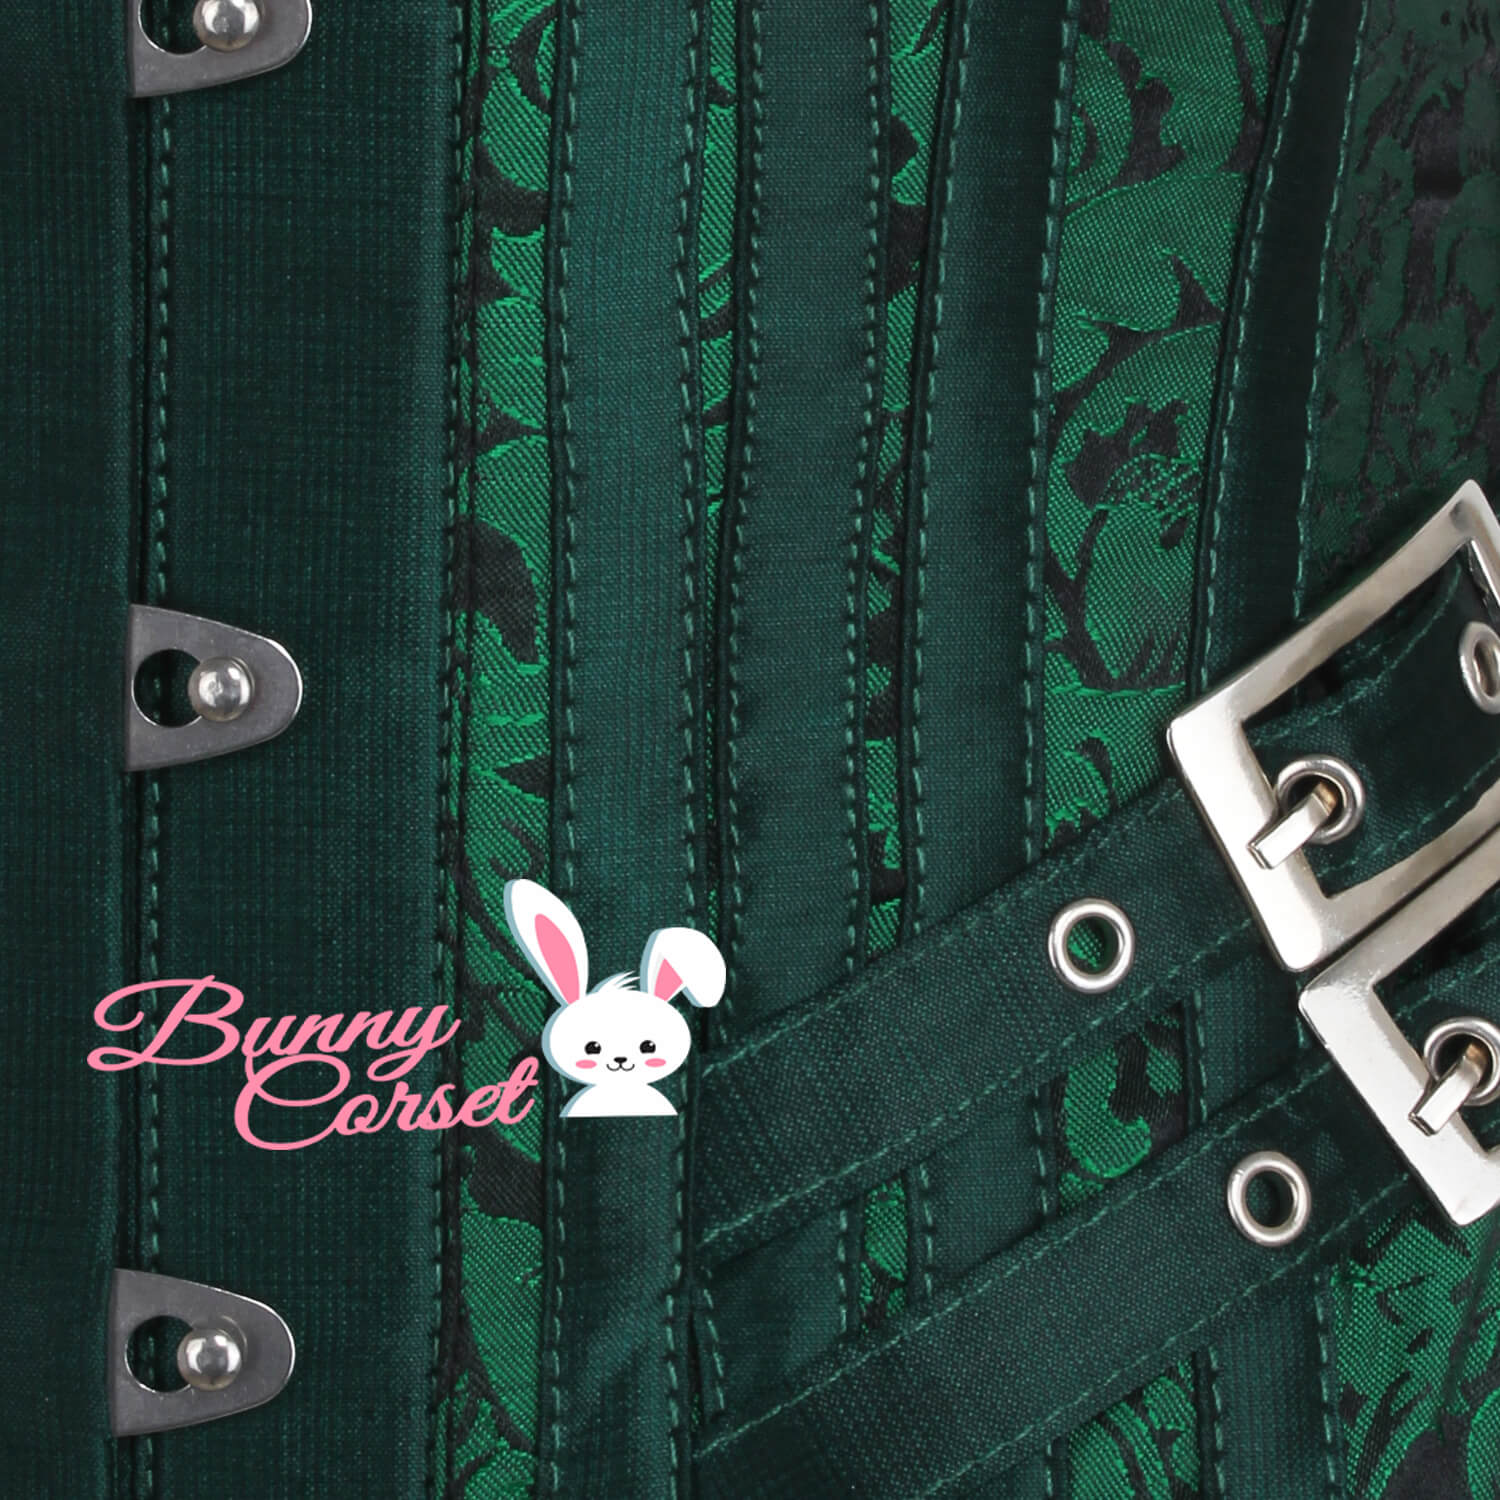 Get this Green Overbust Corset for styish Look! – Bunny Corset